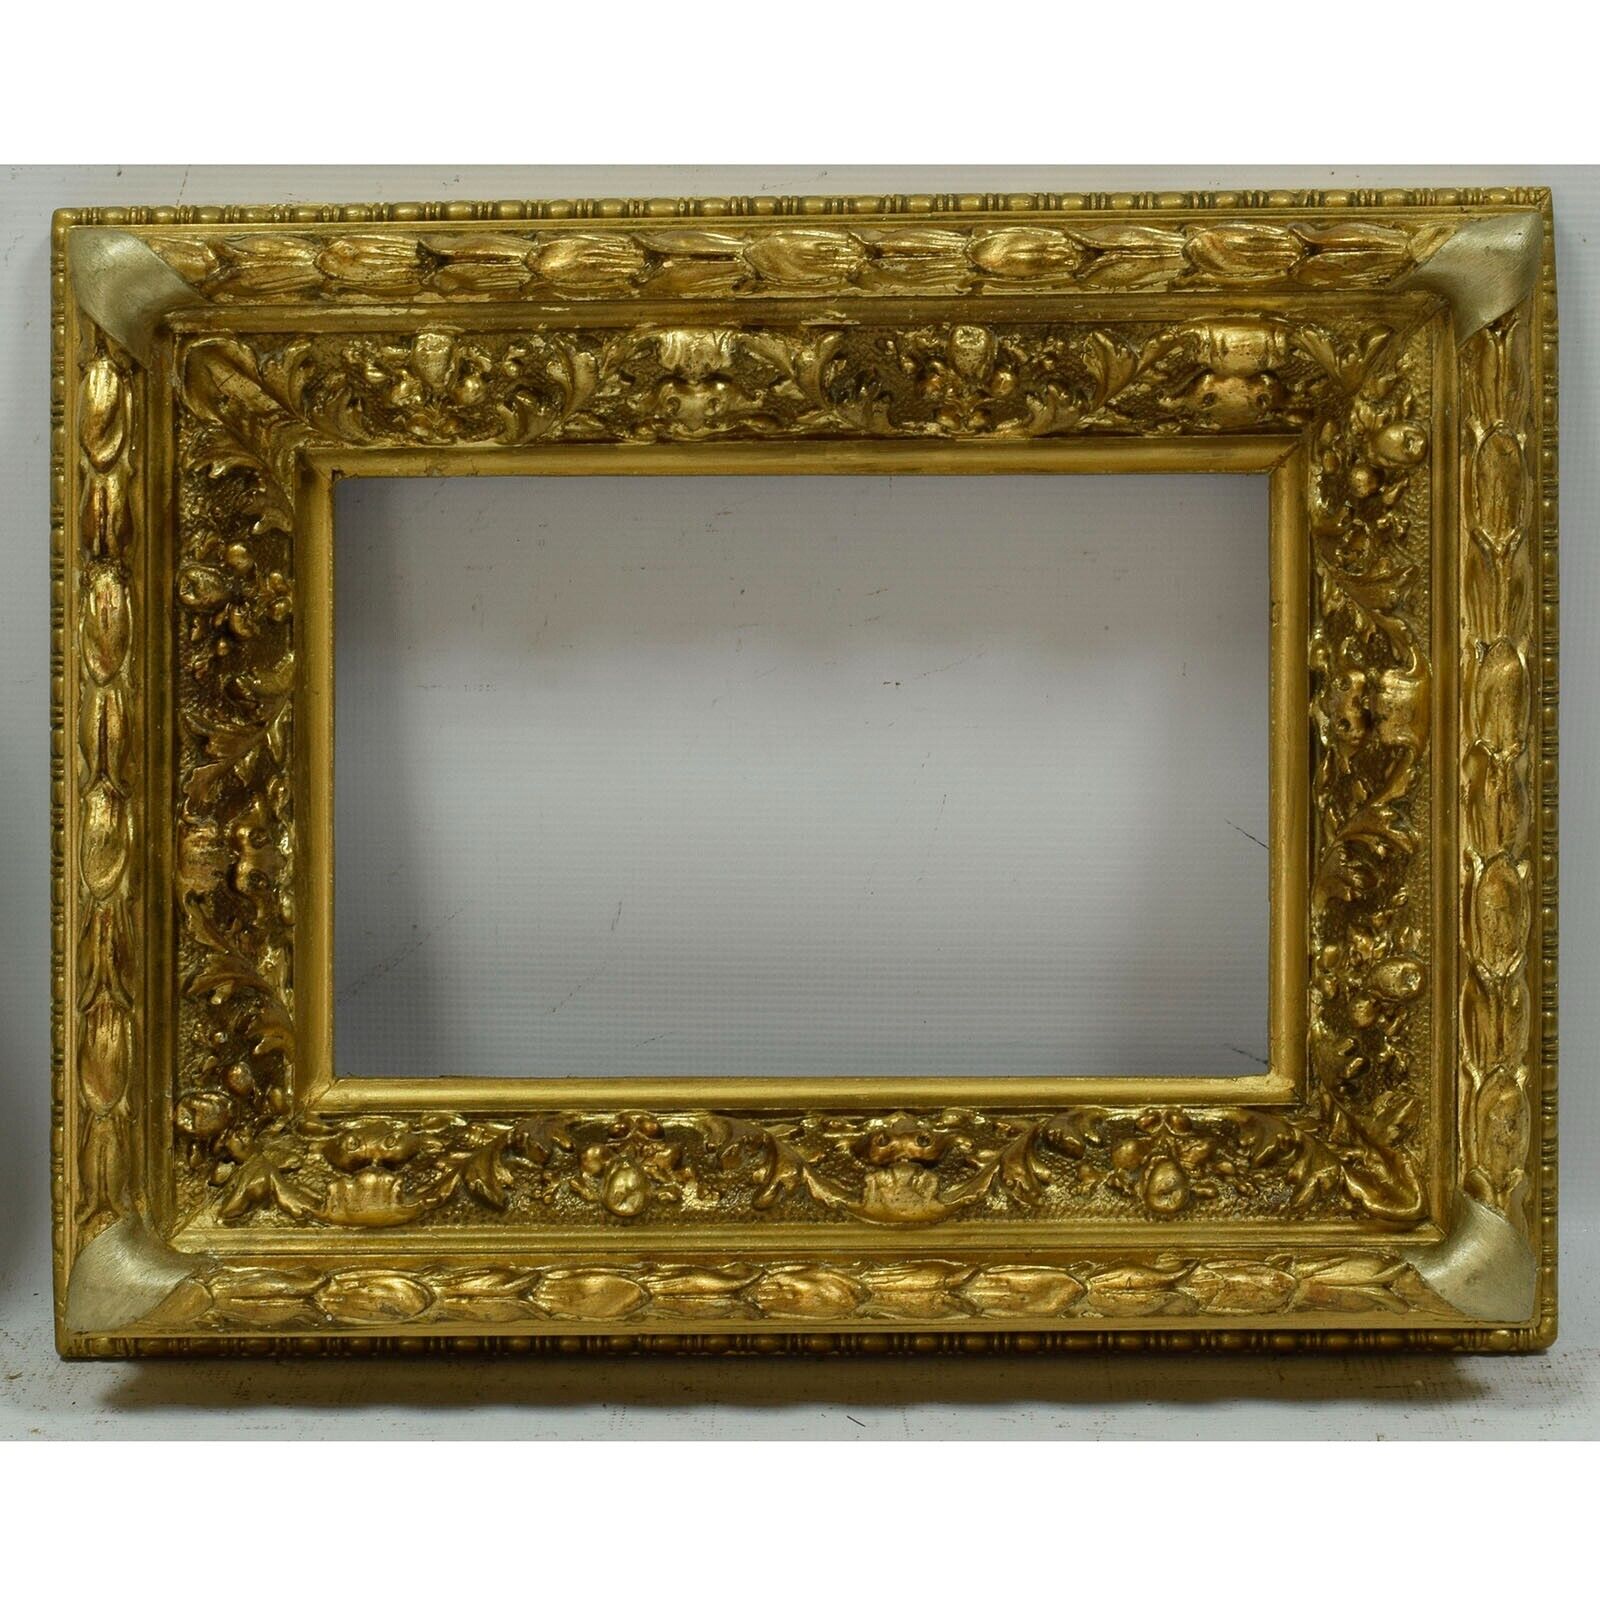 1 half of the 20th century Old wooden frame in original condition 12.2 x 8.2 in